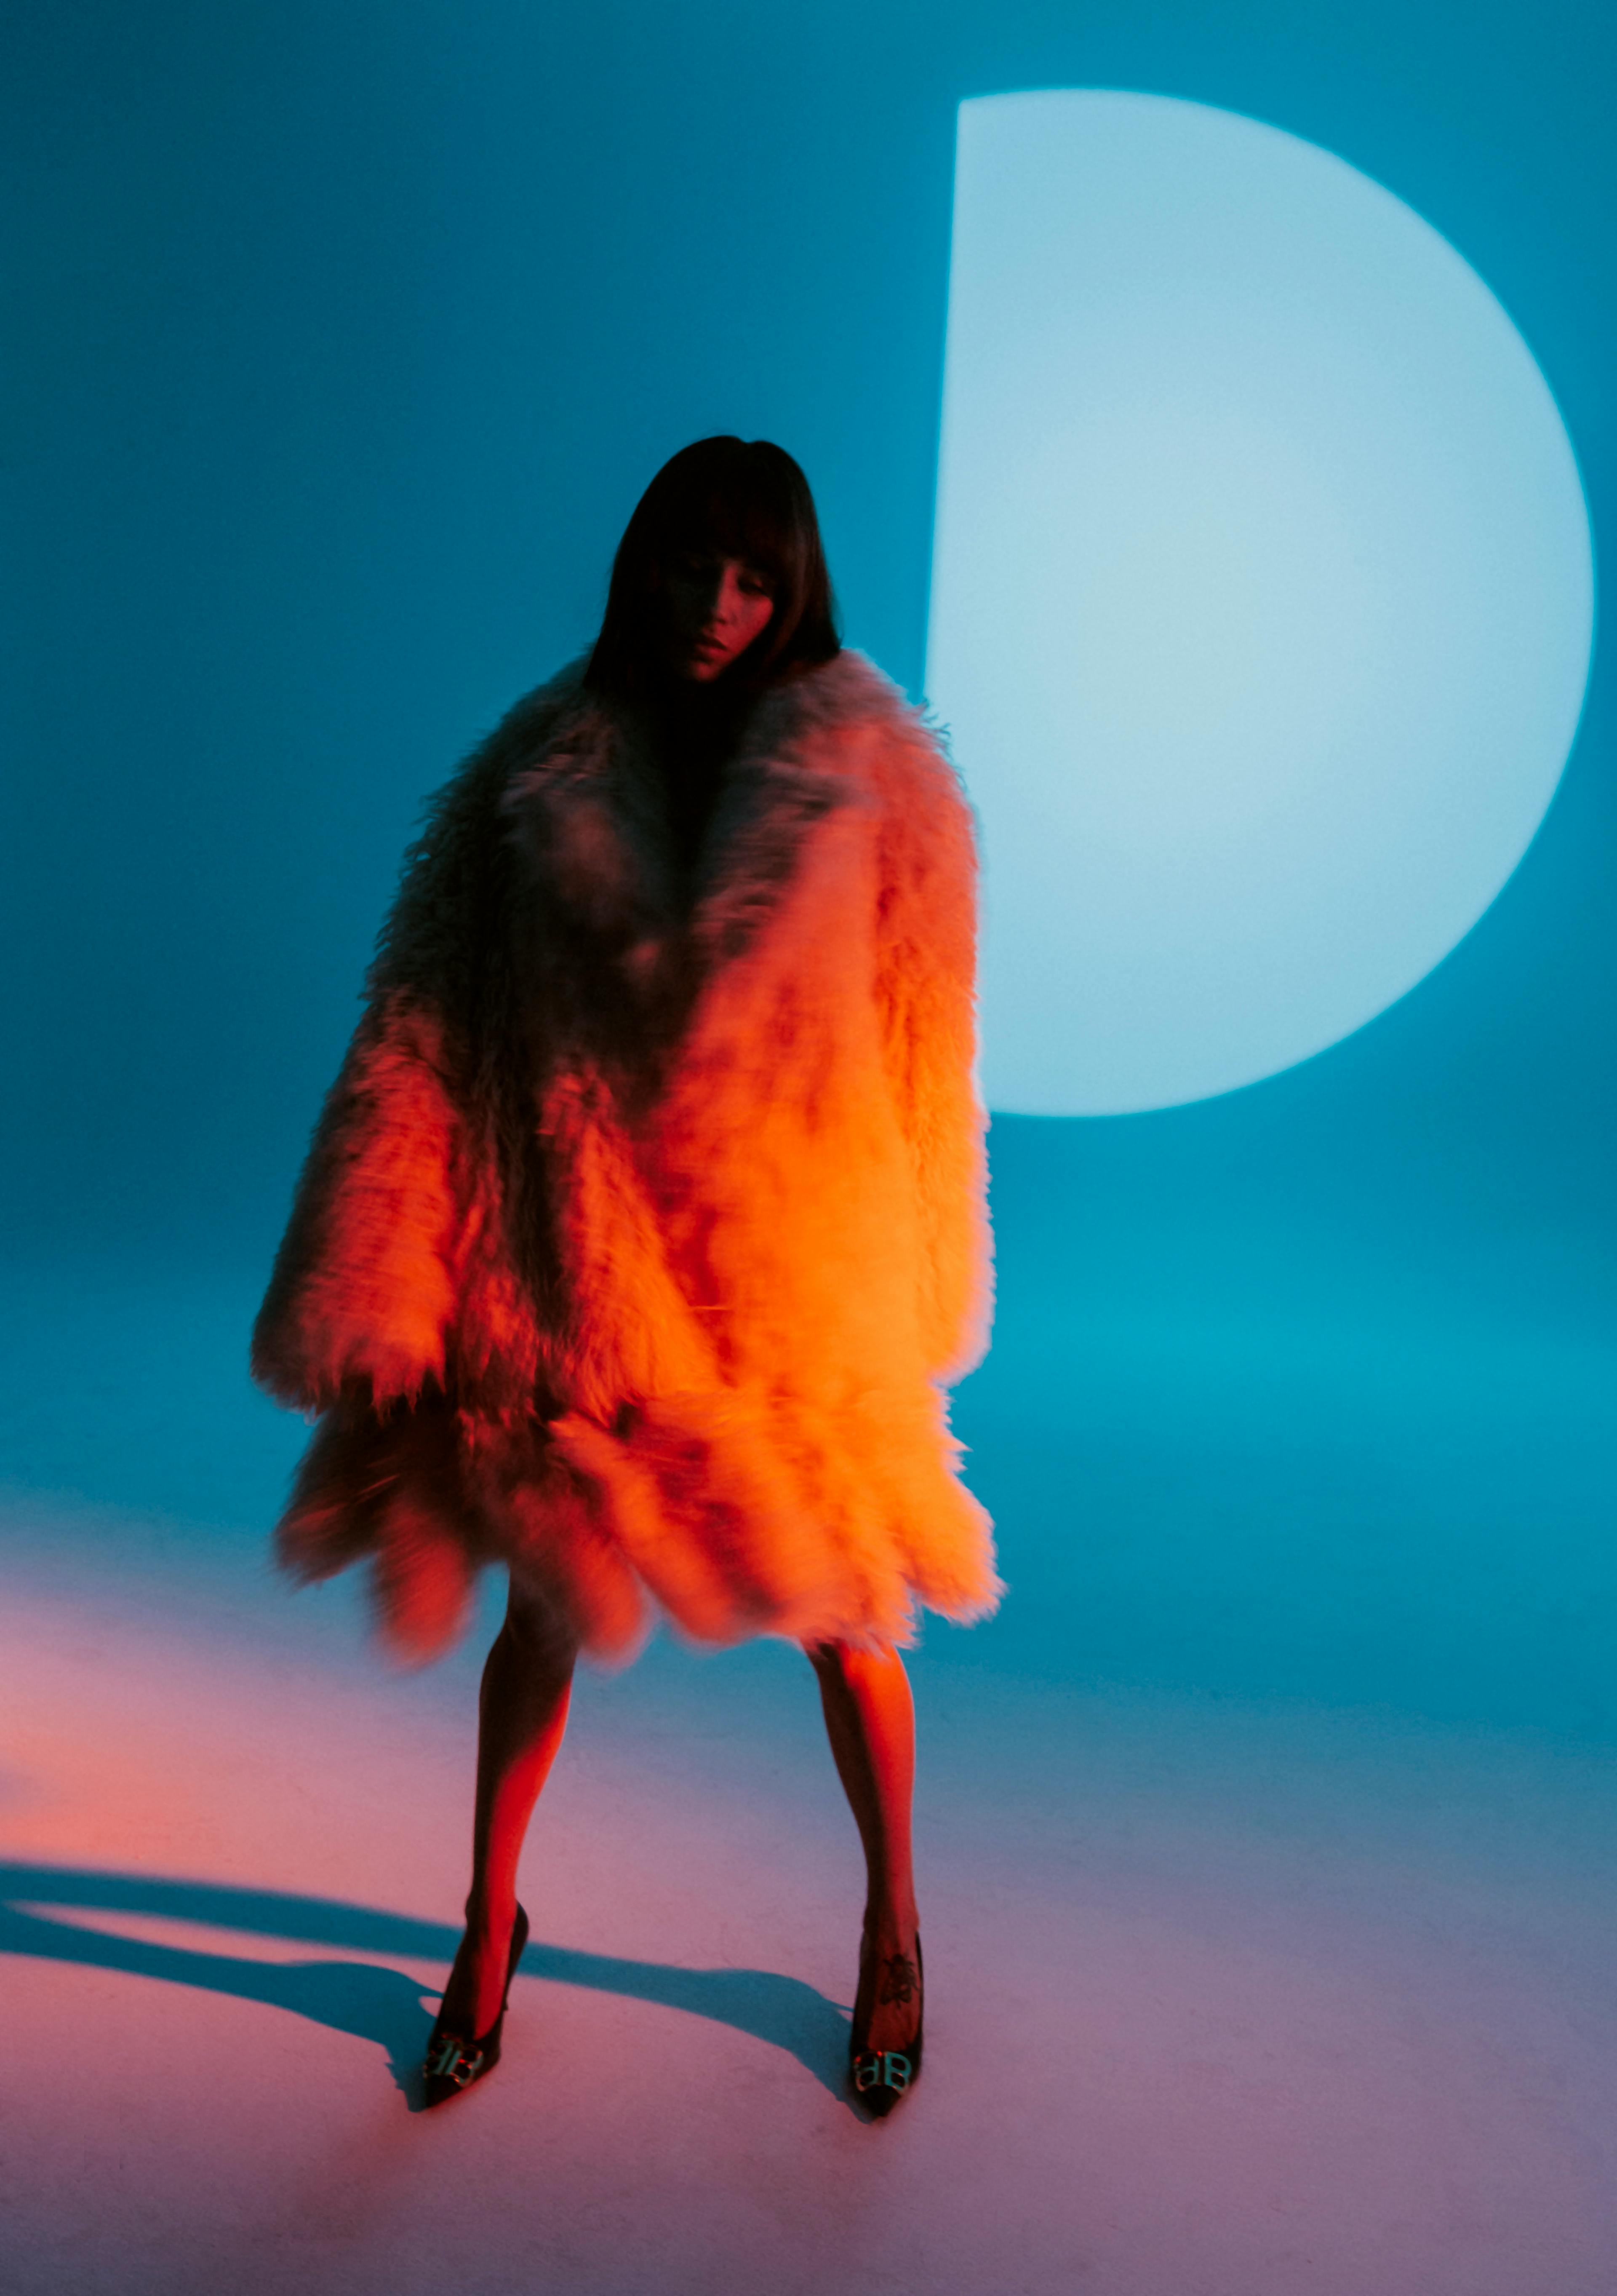 woman wrapped in fur coat and high heels lit by red light